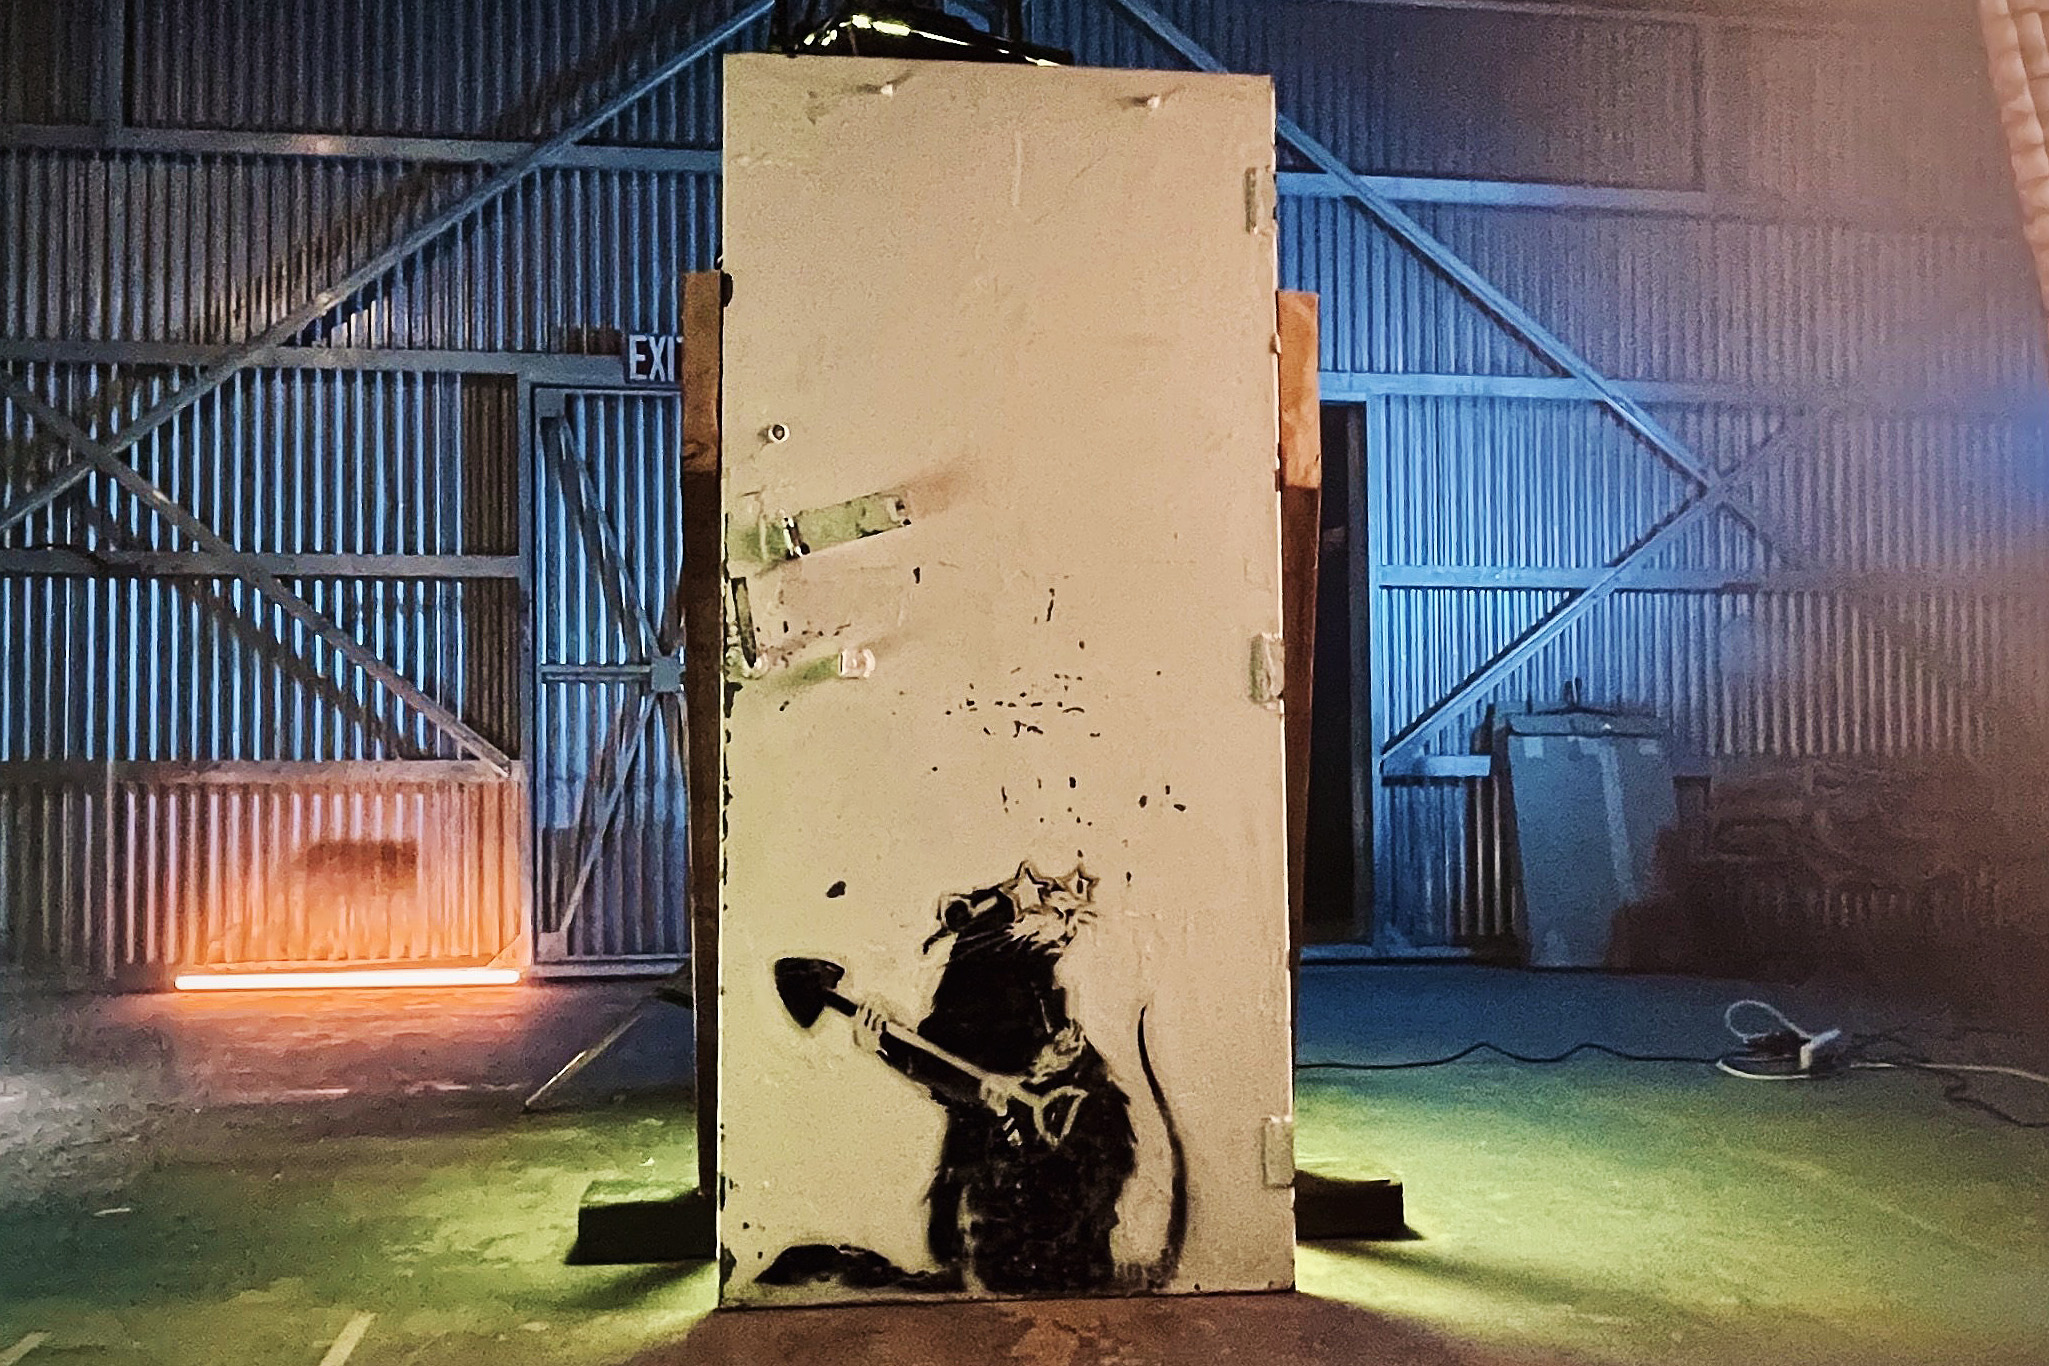 A painting of a rat is seen on a door.